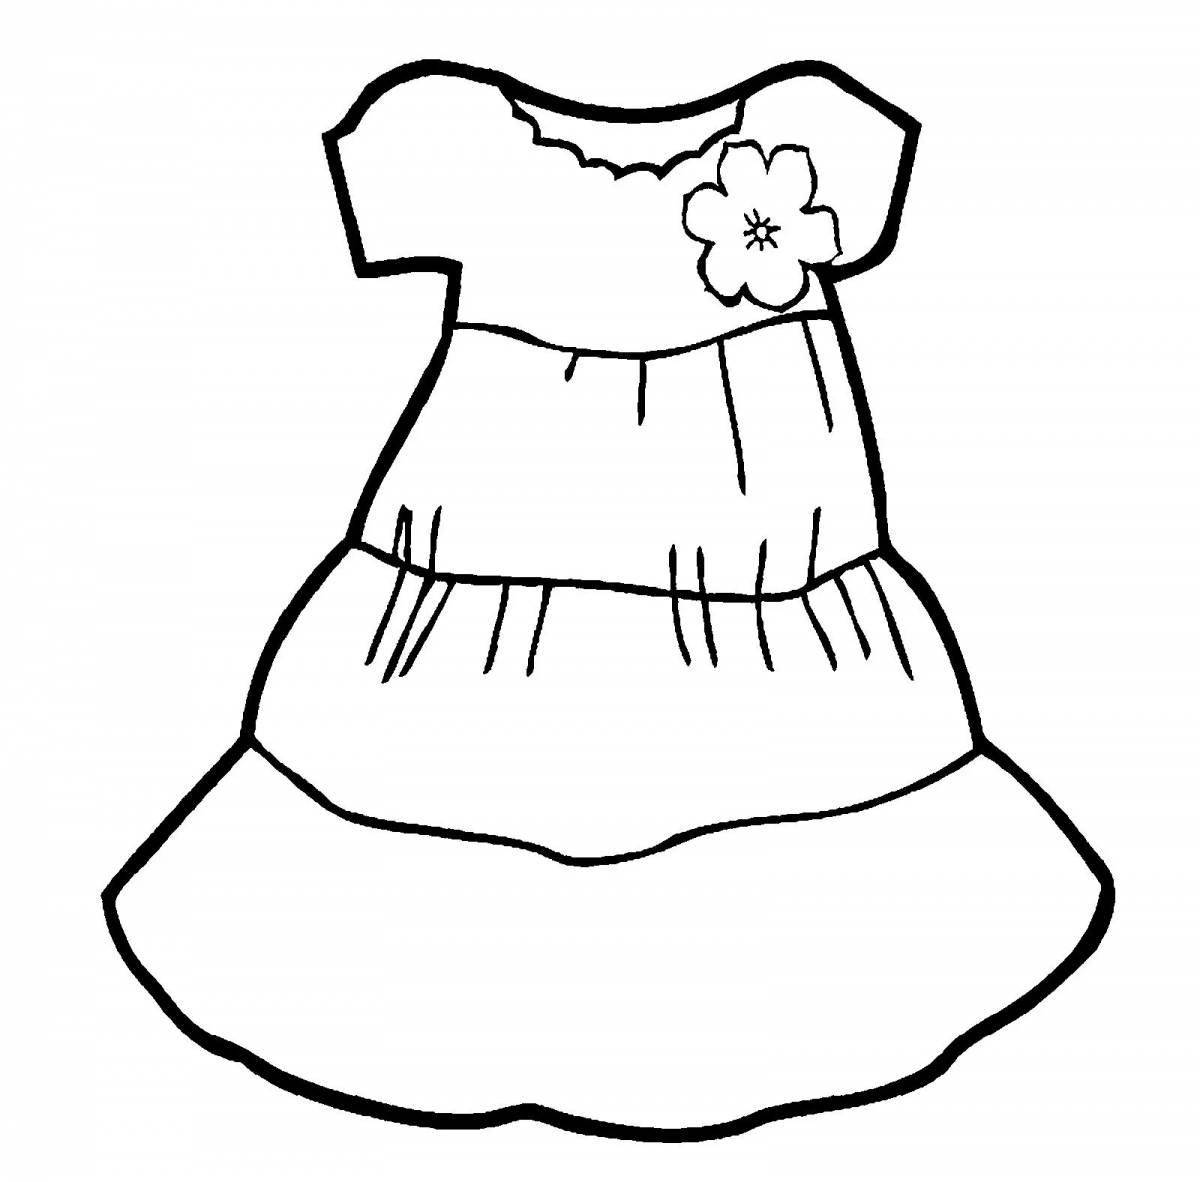 Glitter dress coloring page for children